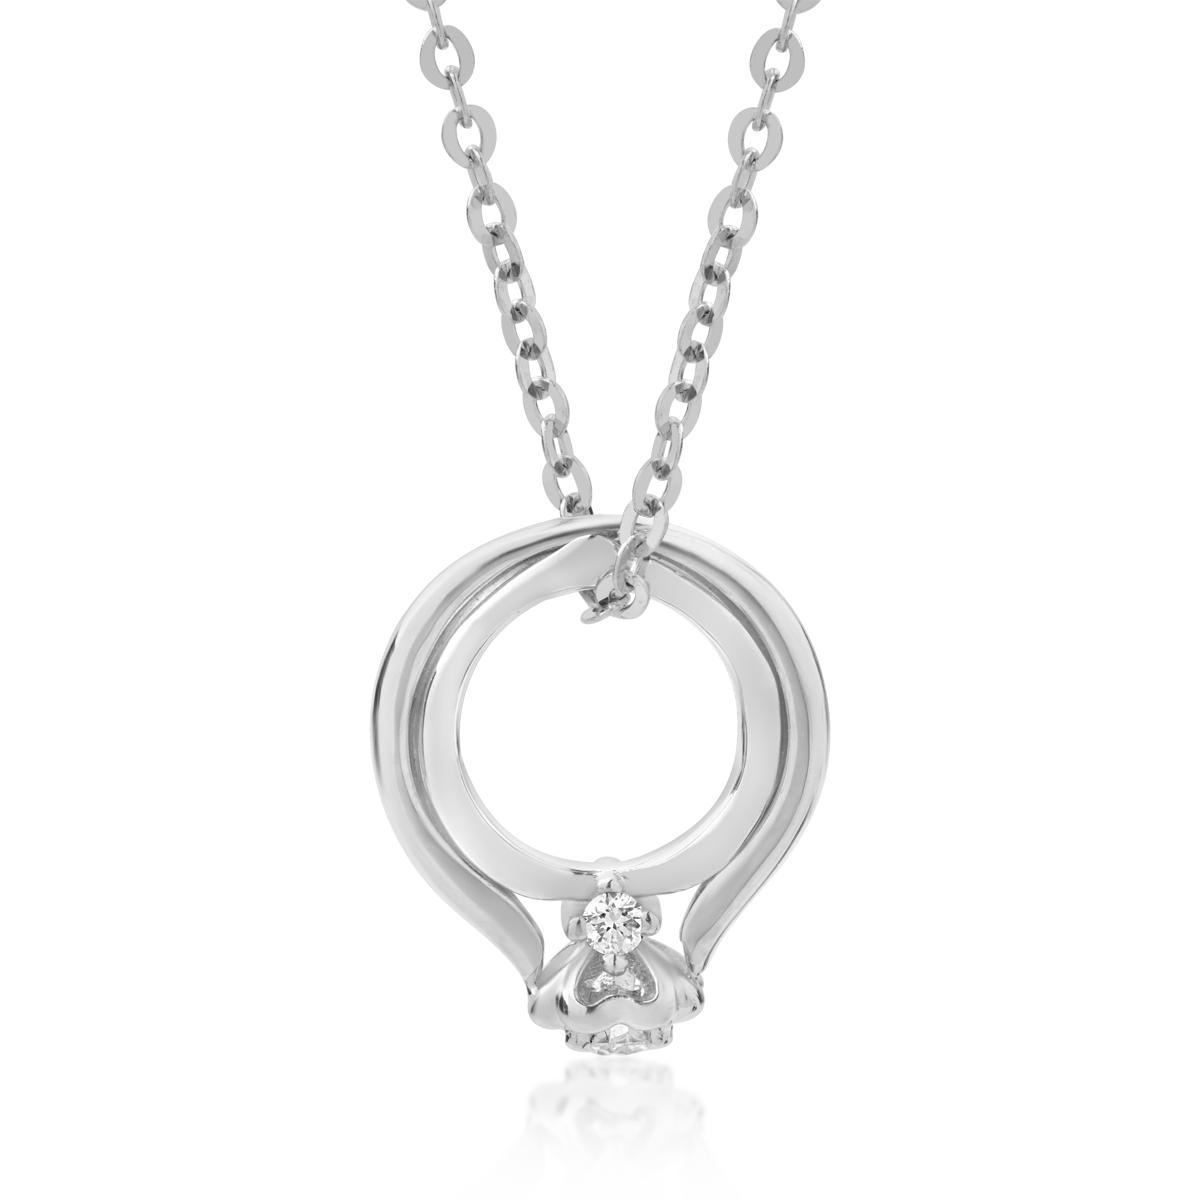 18K white gold ring pendant necklace with 0.06ct diamonds